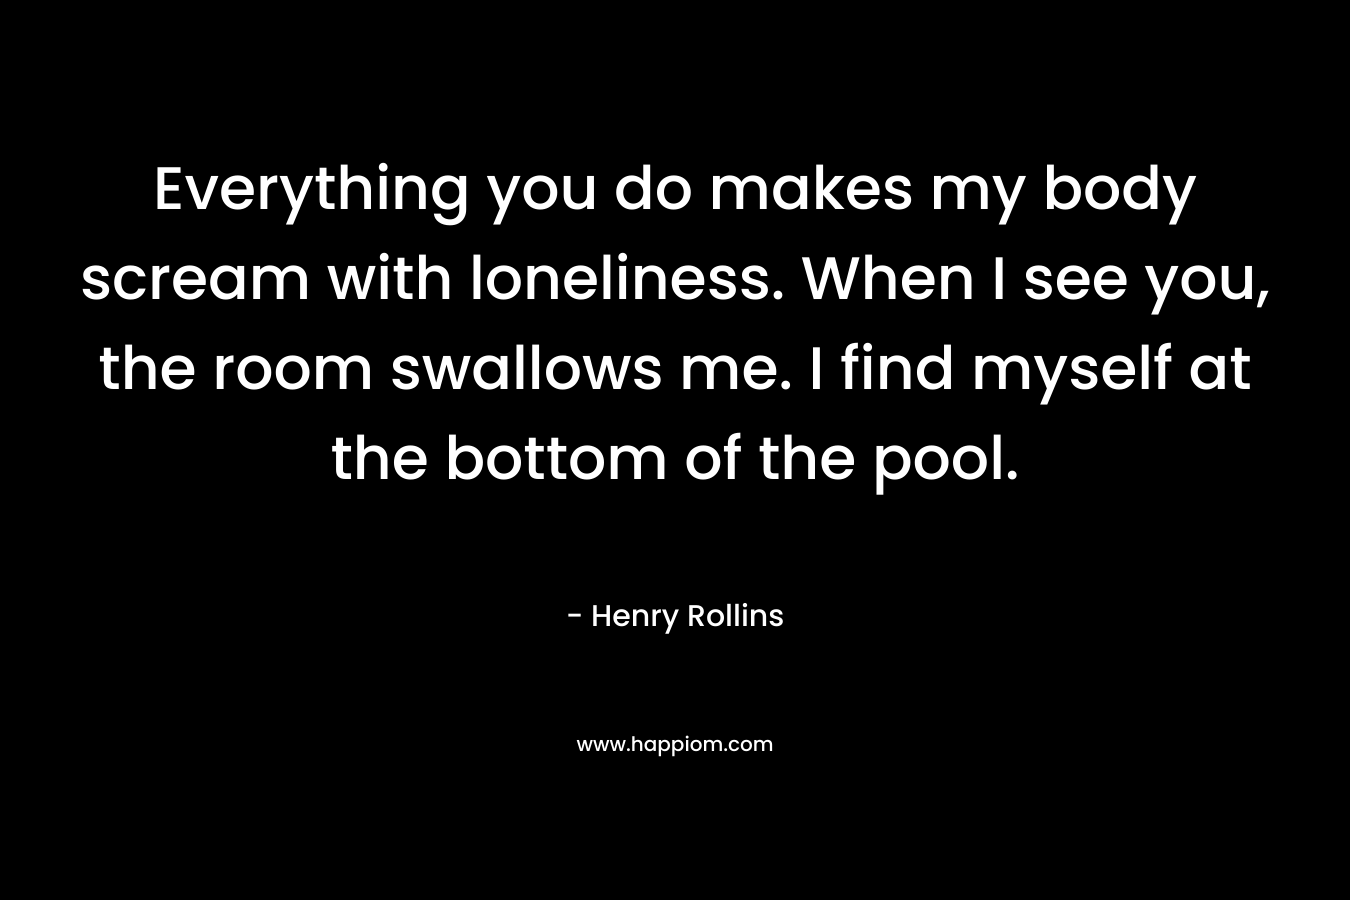 Everything you do makes my body scream with loneliness. When I see you, the room swallows me. I find myself at the bottom of the pool. – Henry Rollins